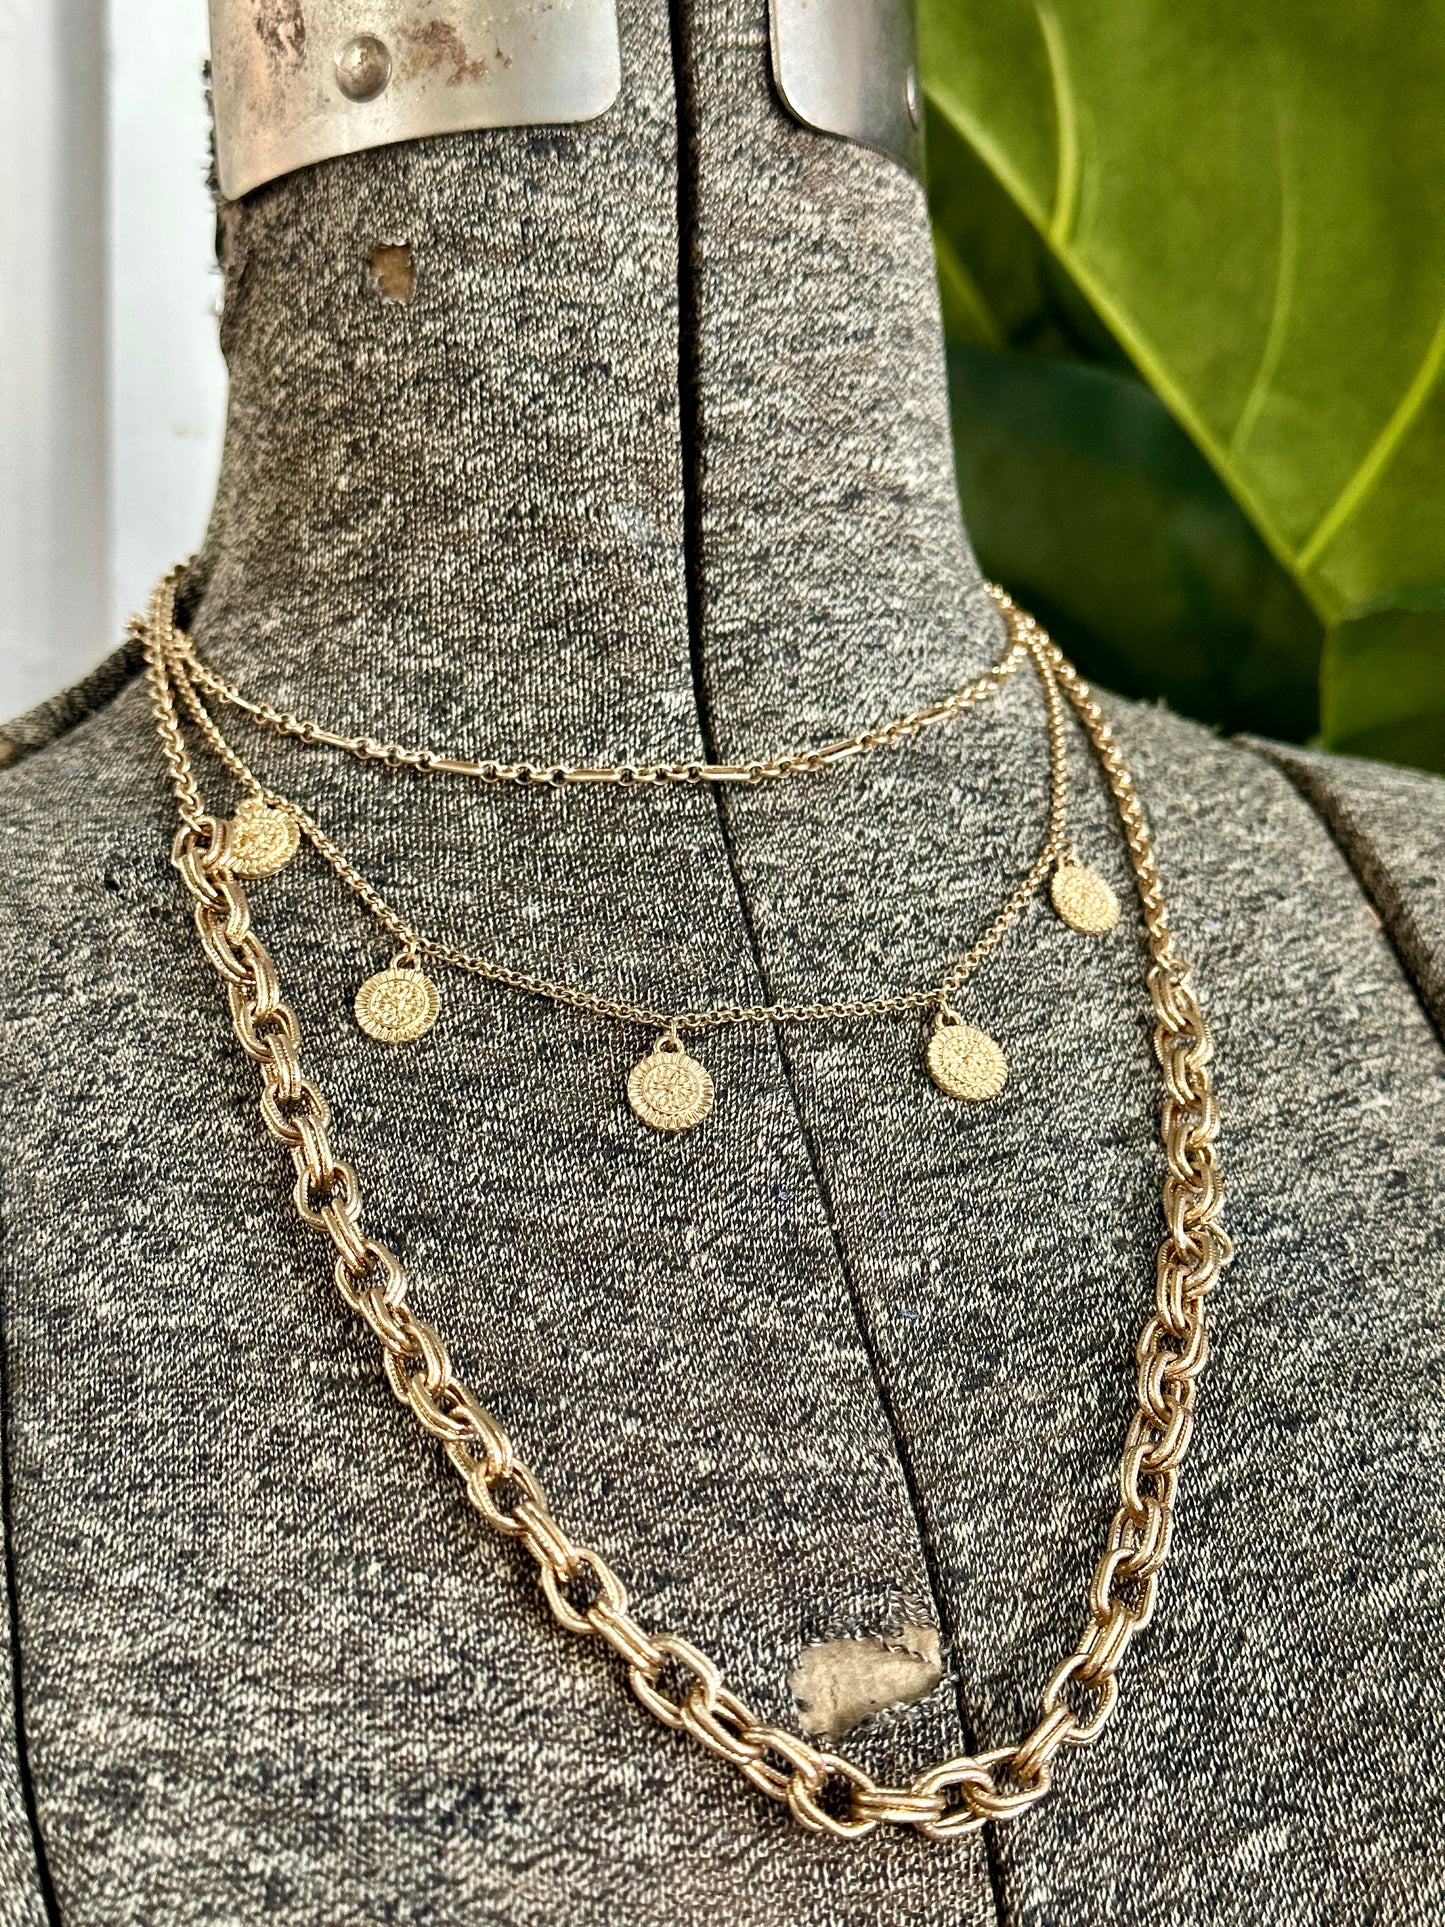 Layered Coin Necklace